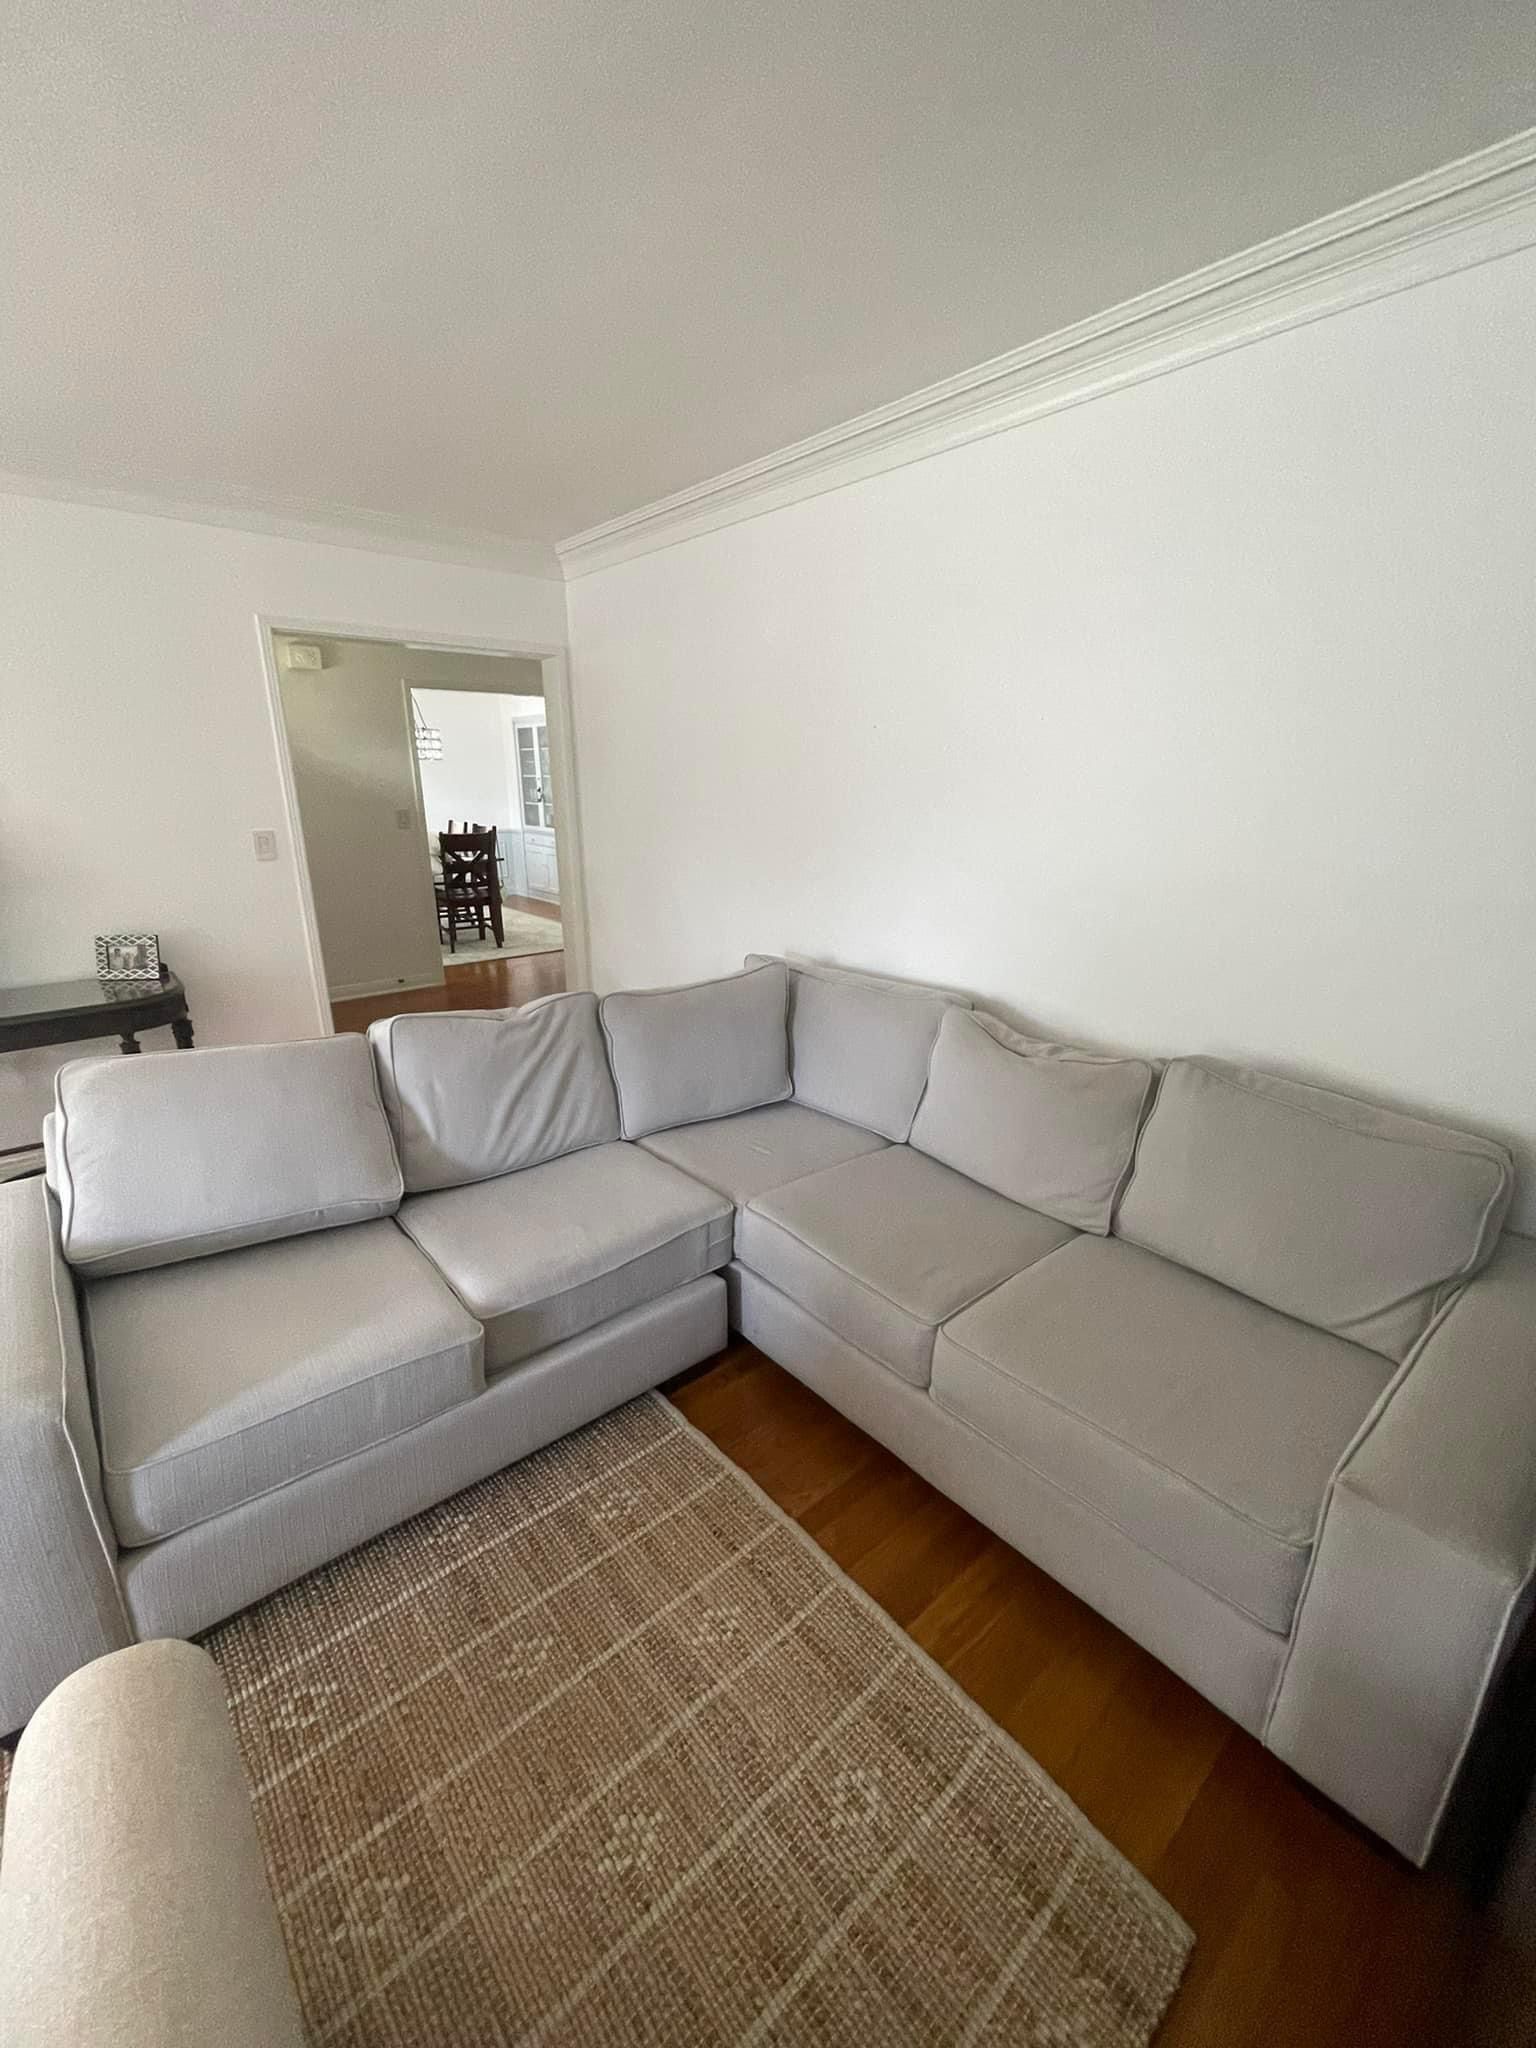 Light grey sectional couch